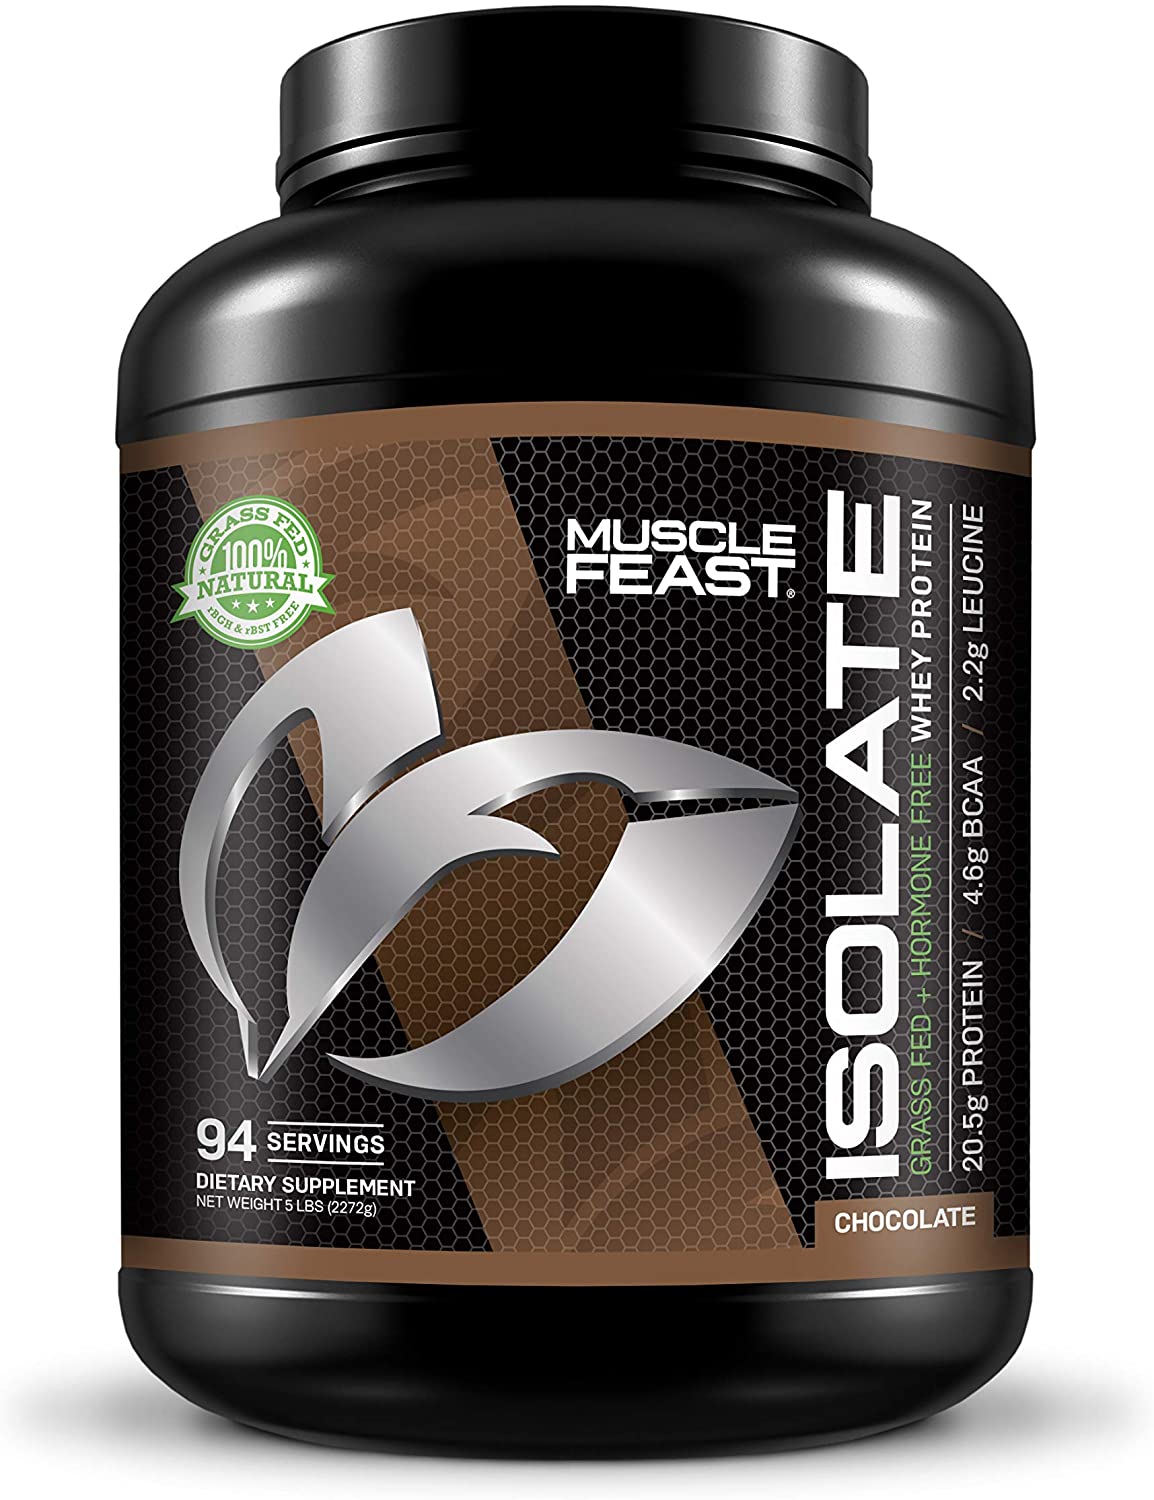 Muscle Feast Vegetarian Whey Protein Isolate Powder, Chocolate